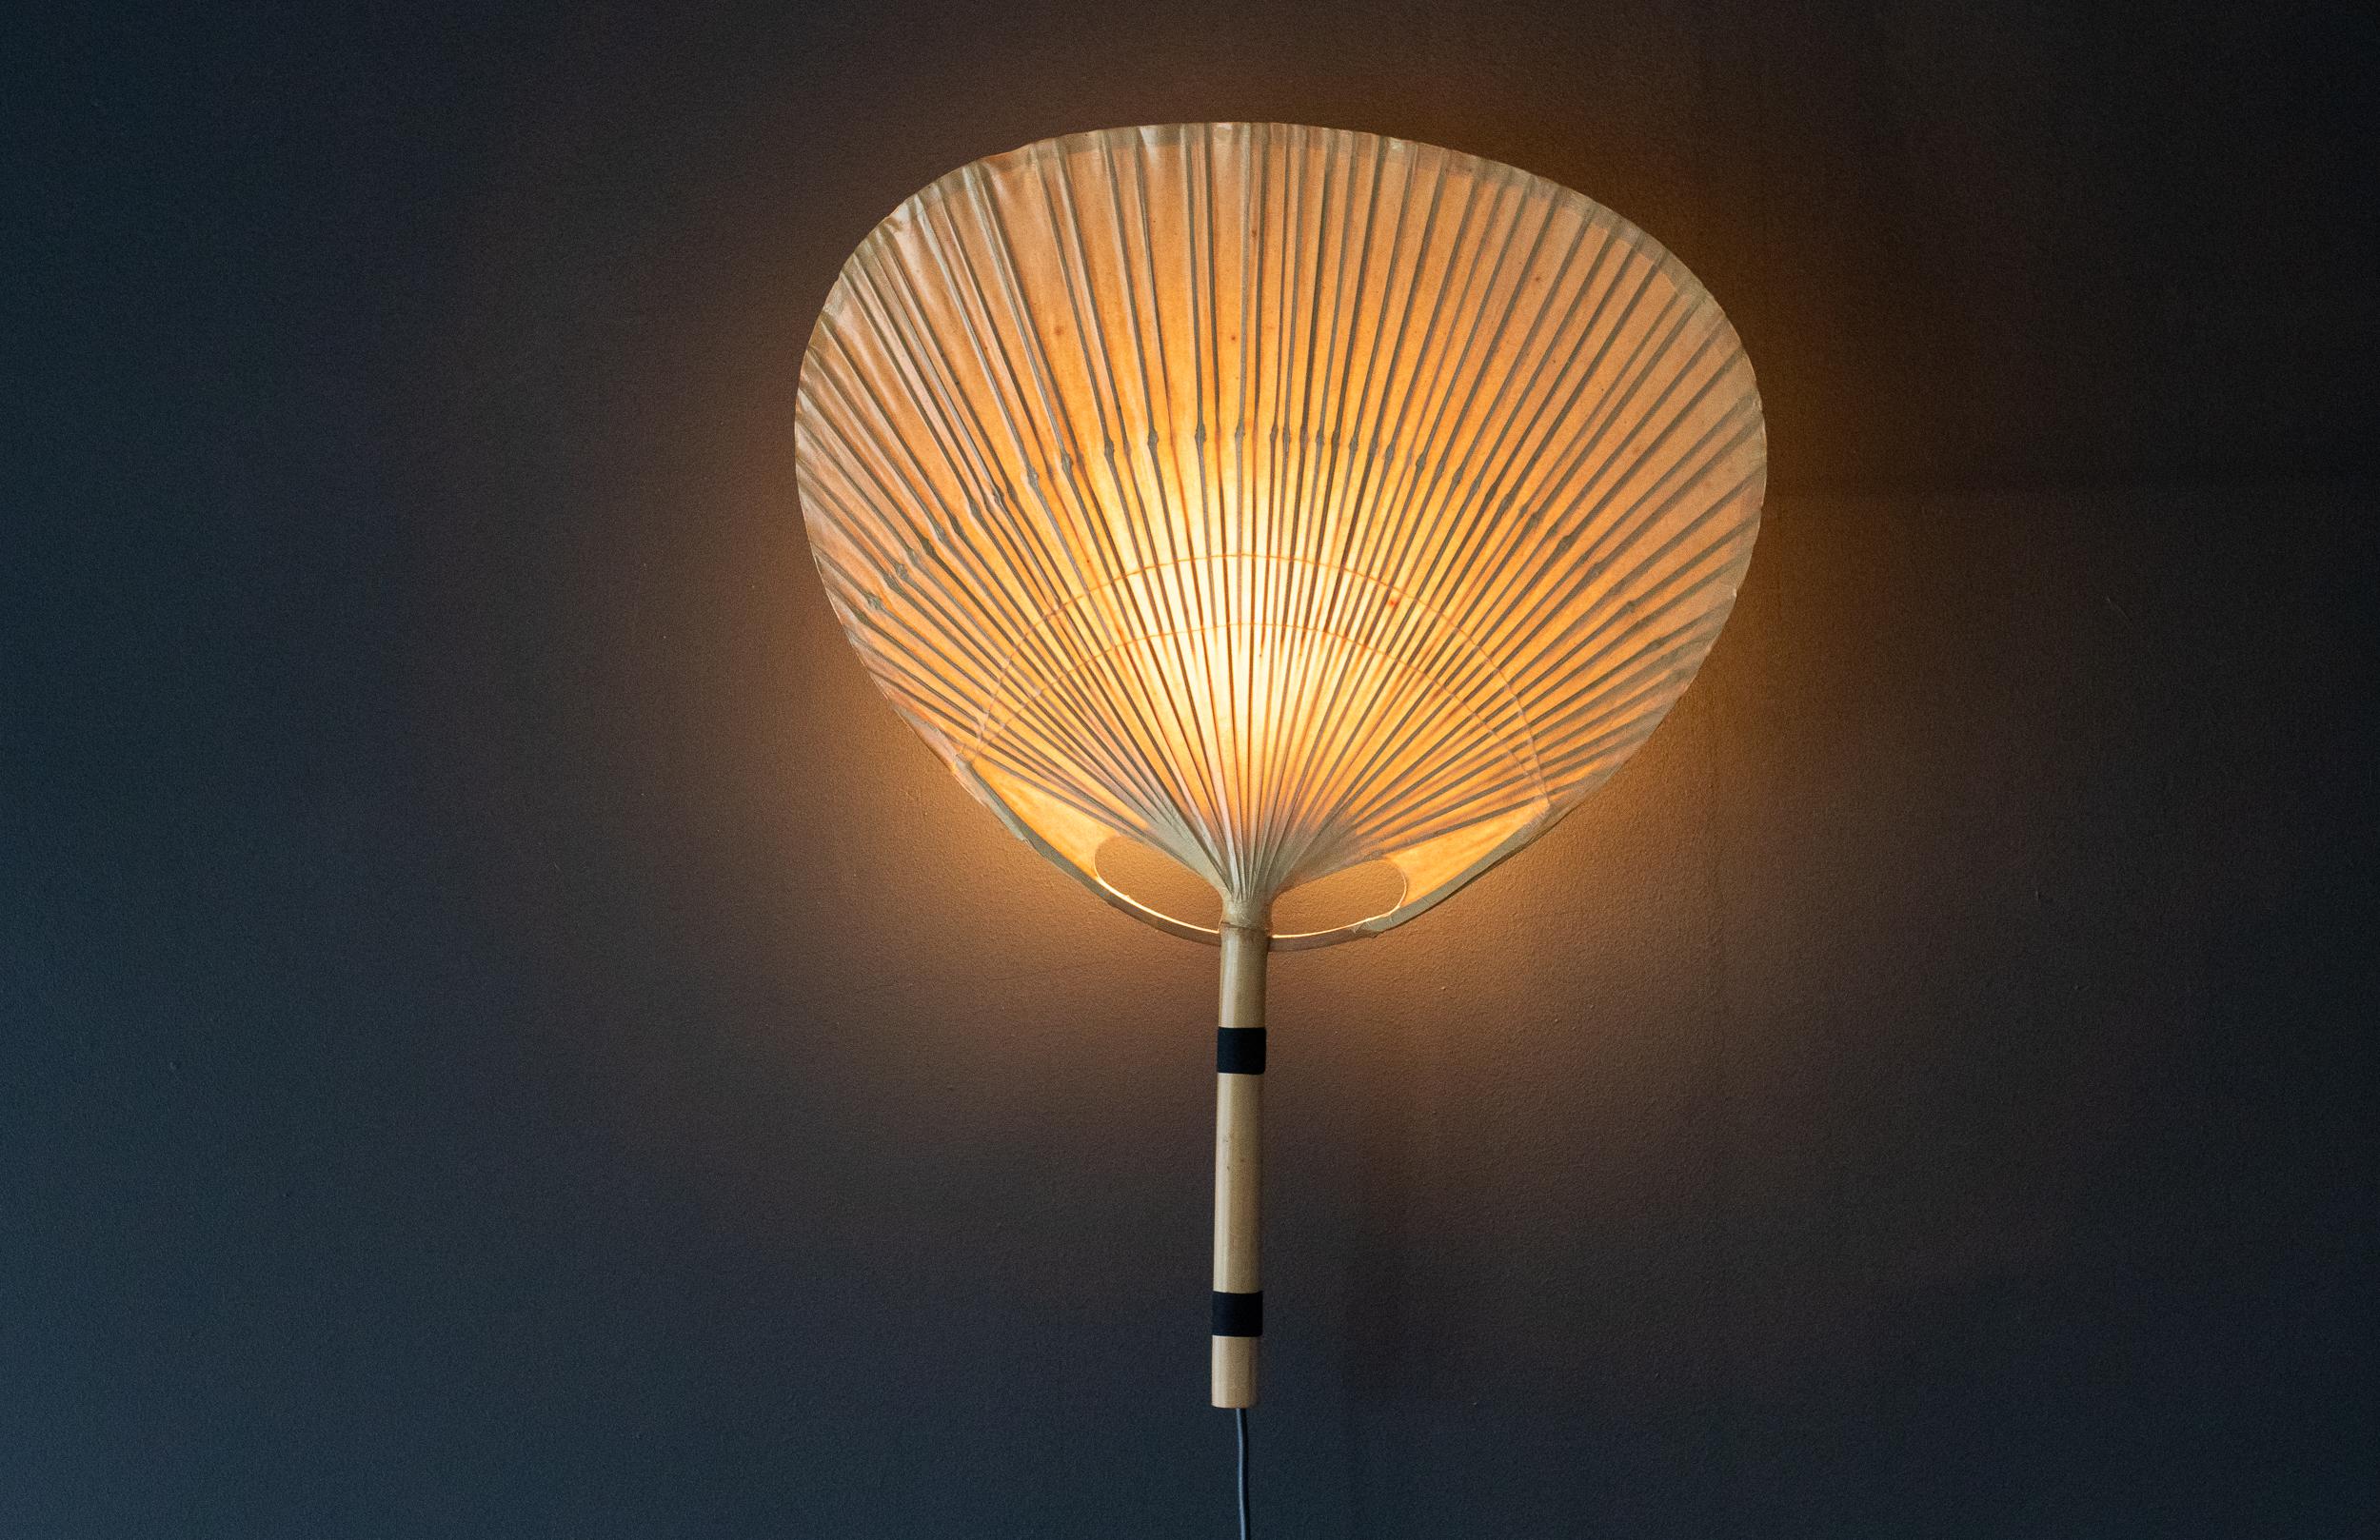 An “Uchiwa” wall light by Ingo Maurer (1932 to 2019) for M design, Germany, 1970s. 
Beautiful understated design composed of rice paper and bamboo, which gives a beautifully warm and diffuse glow. The light is in wonderful all original vintage